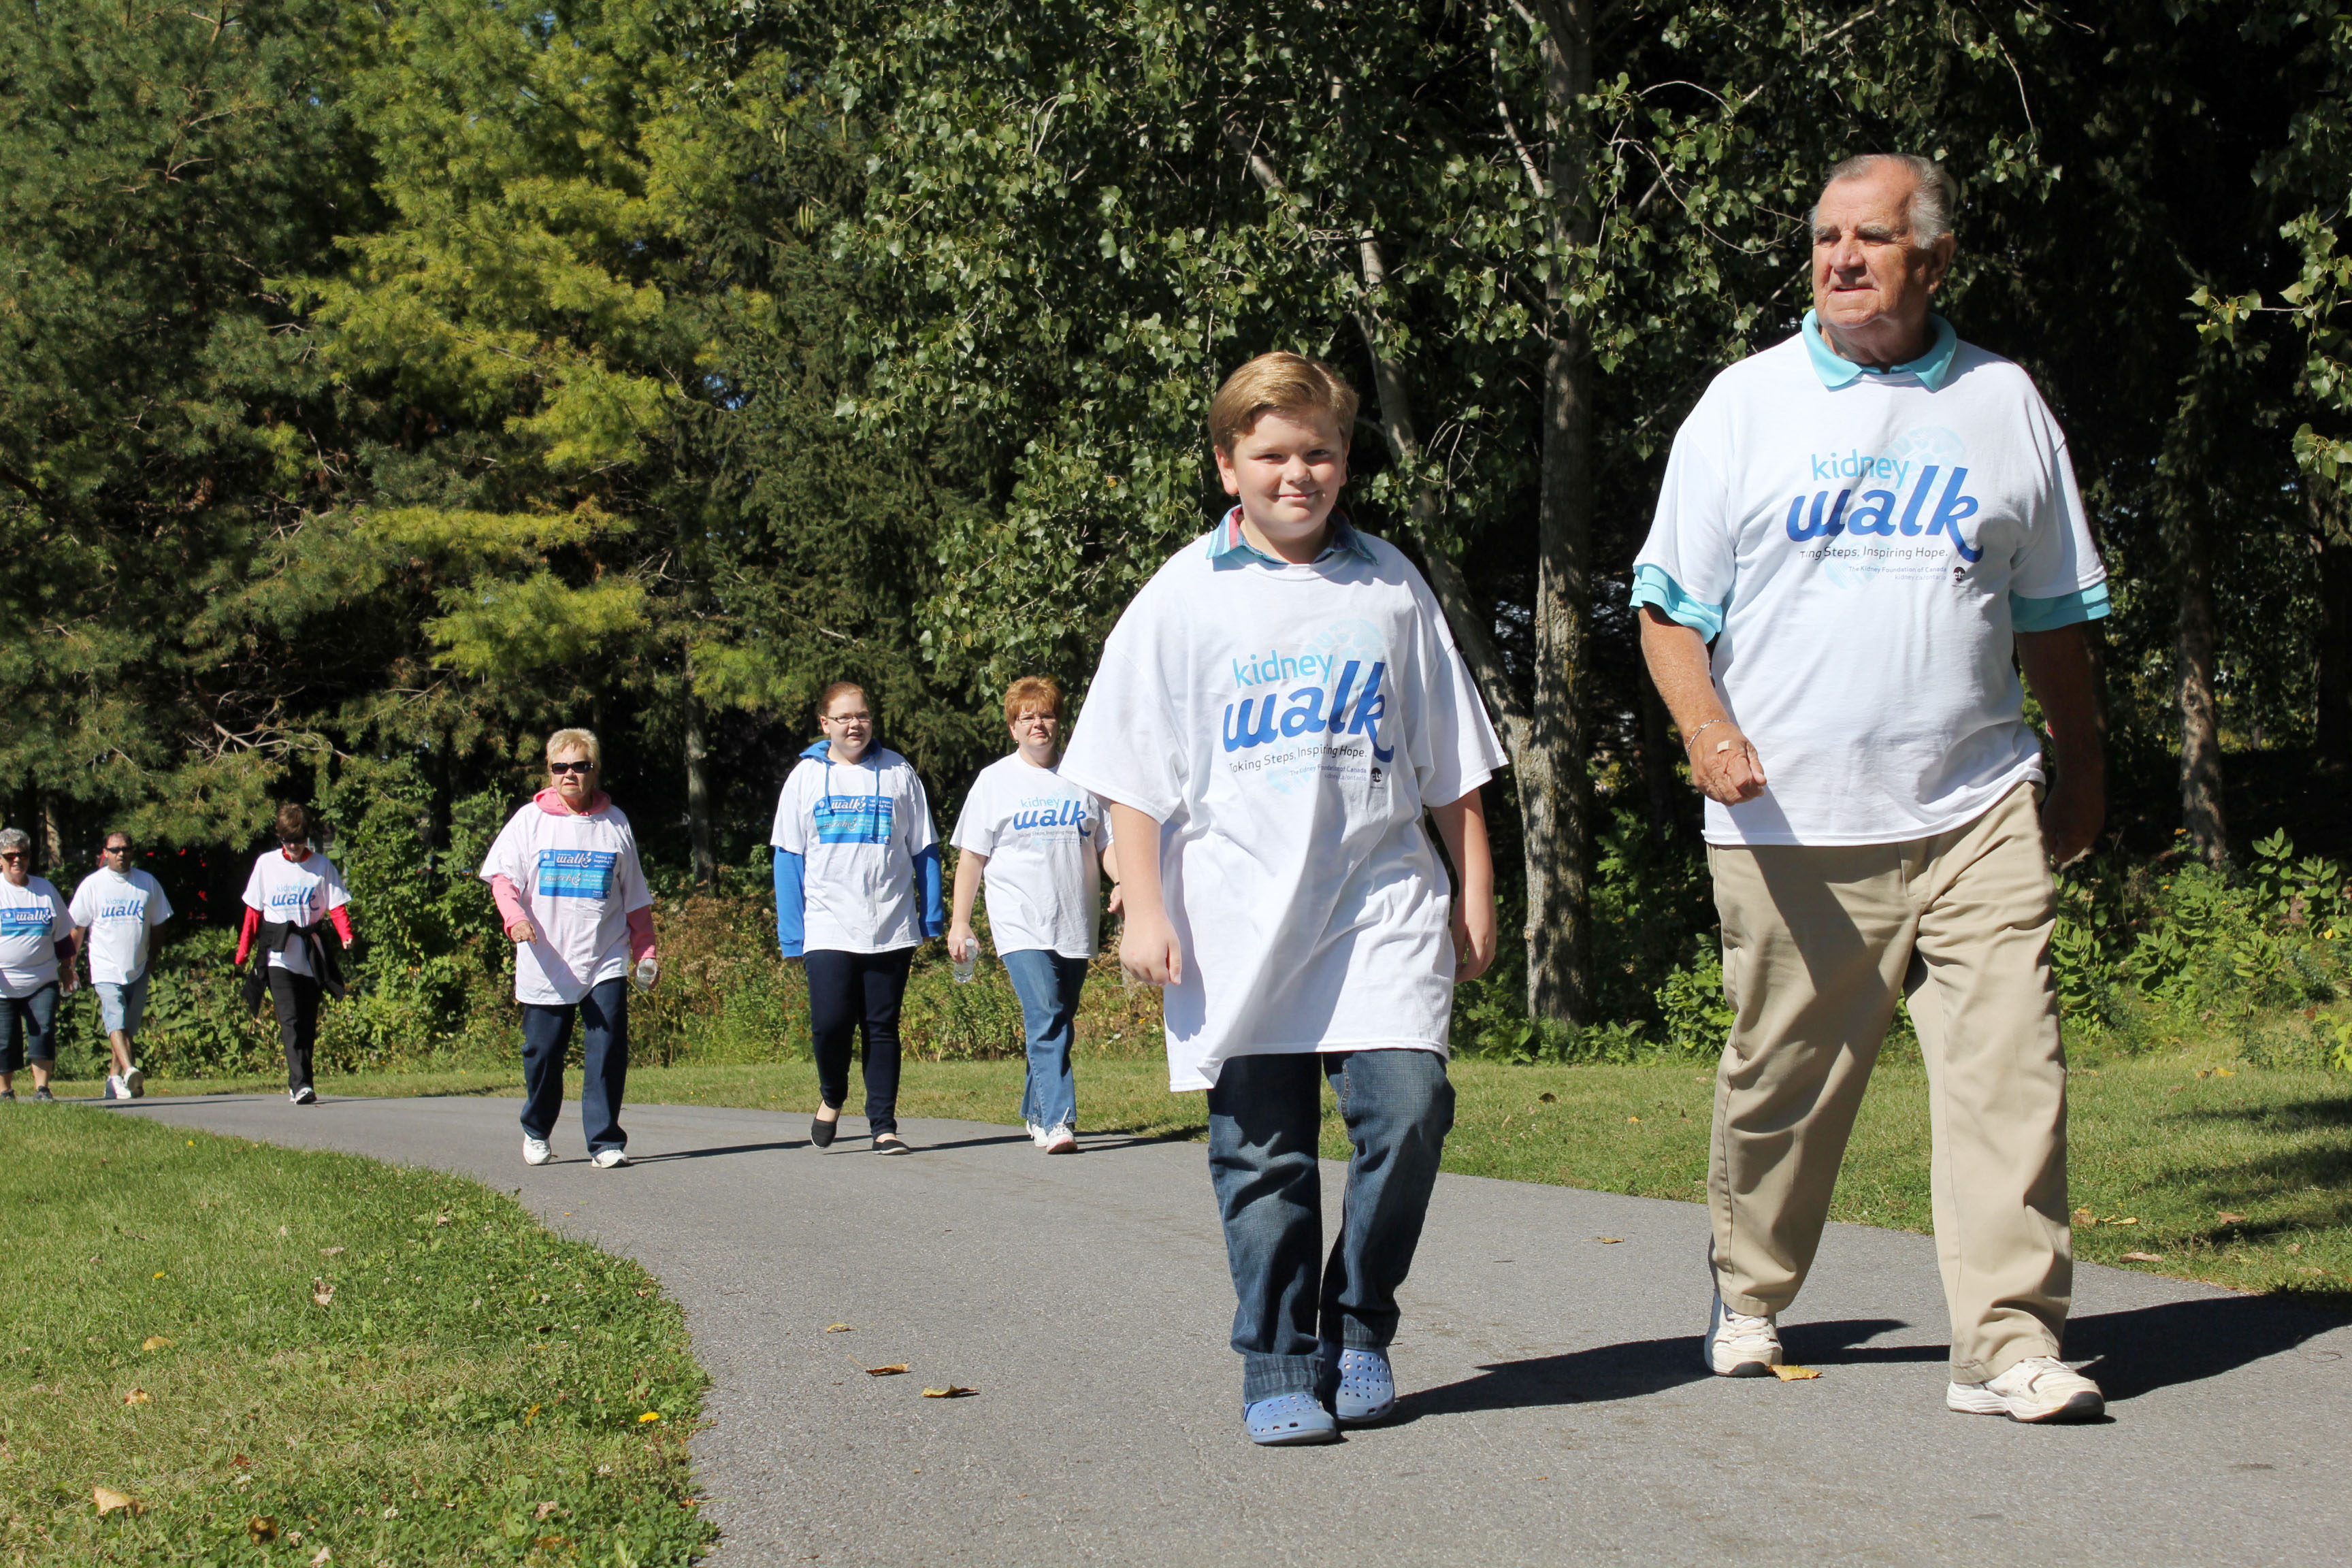 Dialysis patient marches with family at Kidney Walk